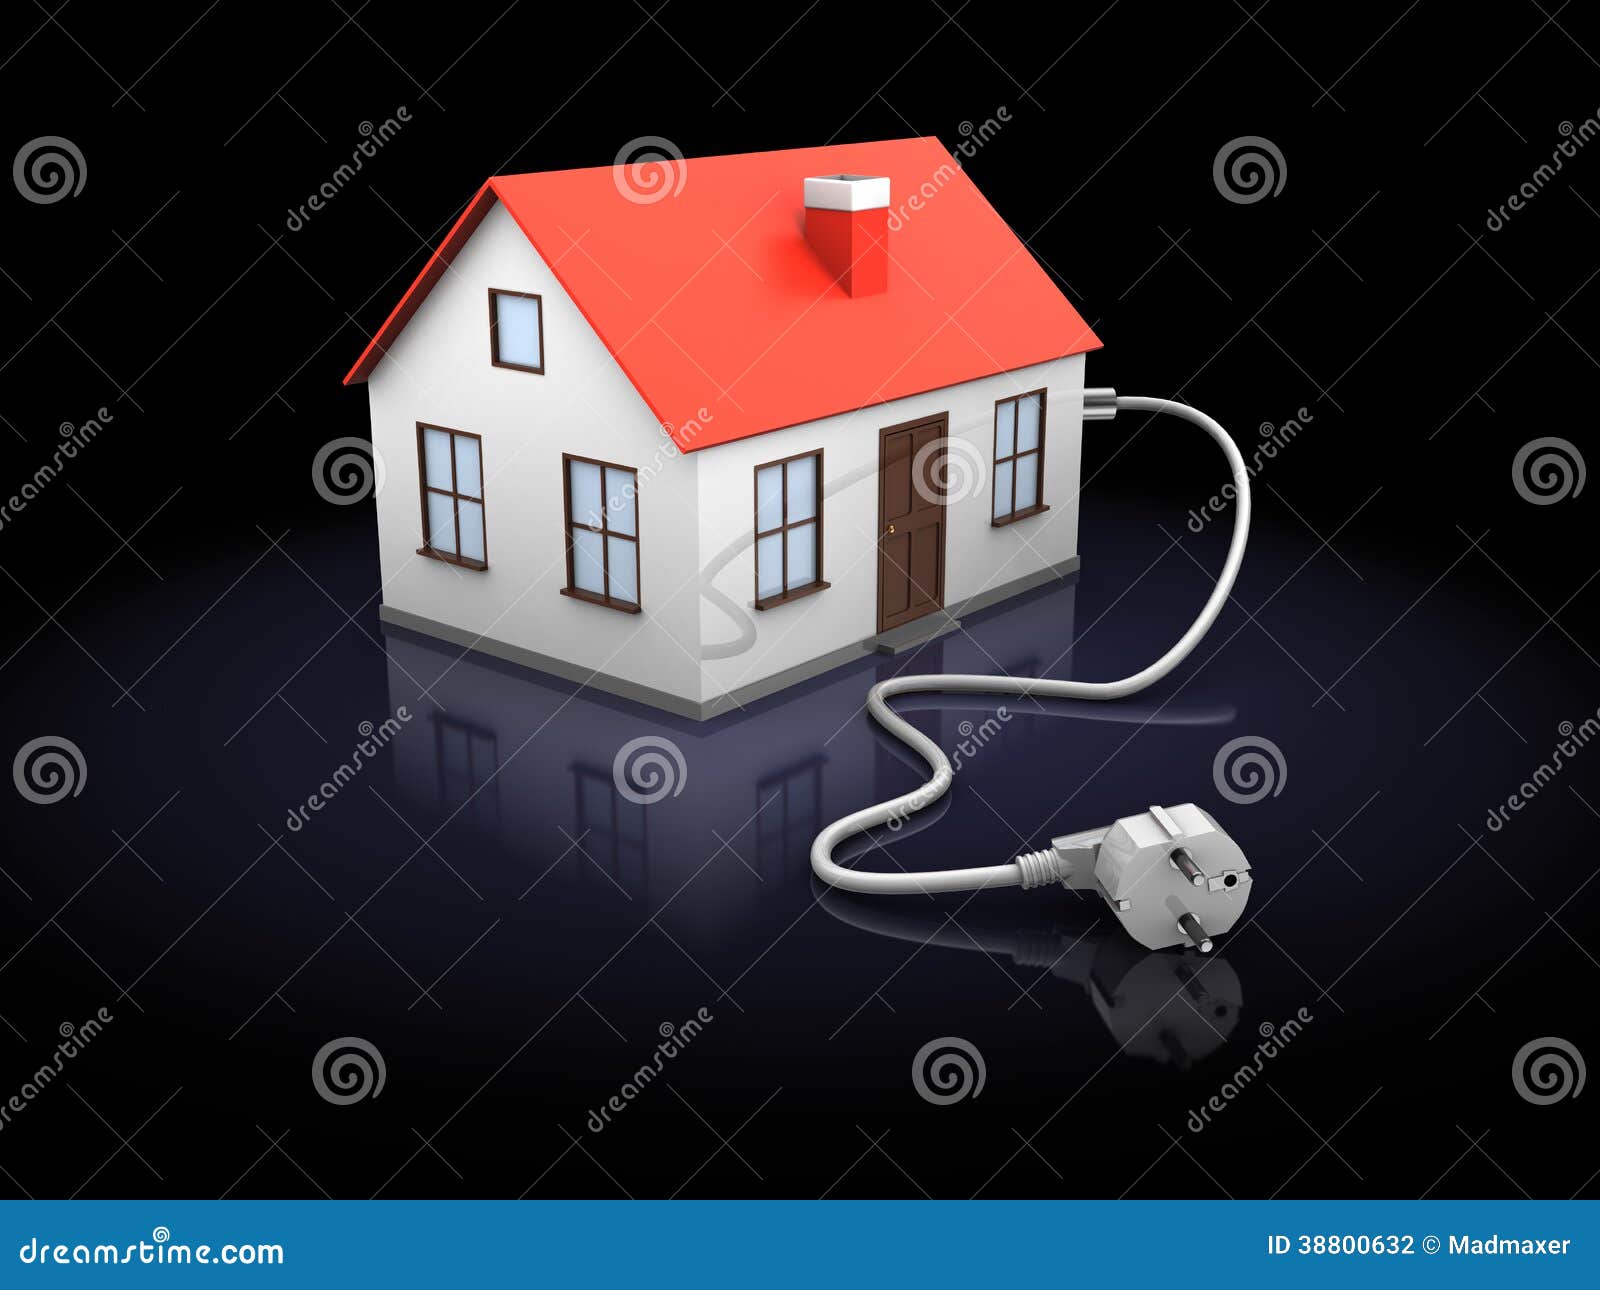 3d illustration of house with power cord, over black background